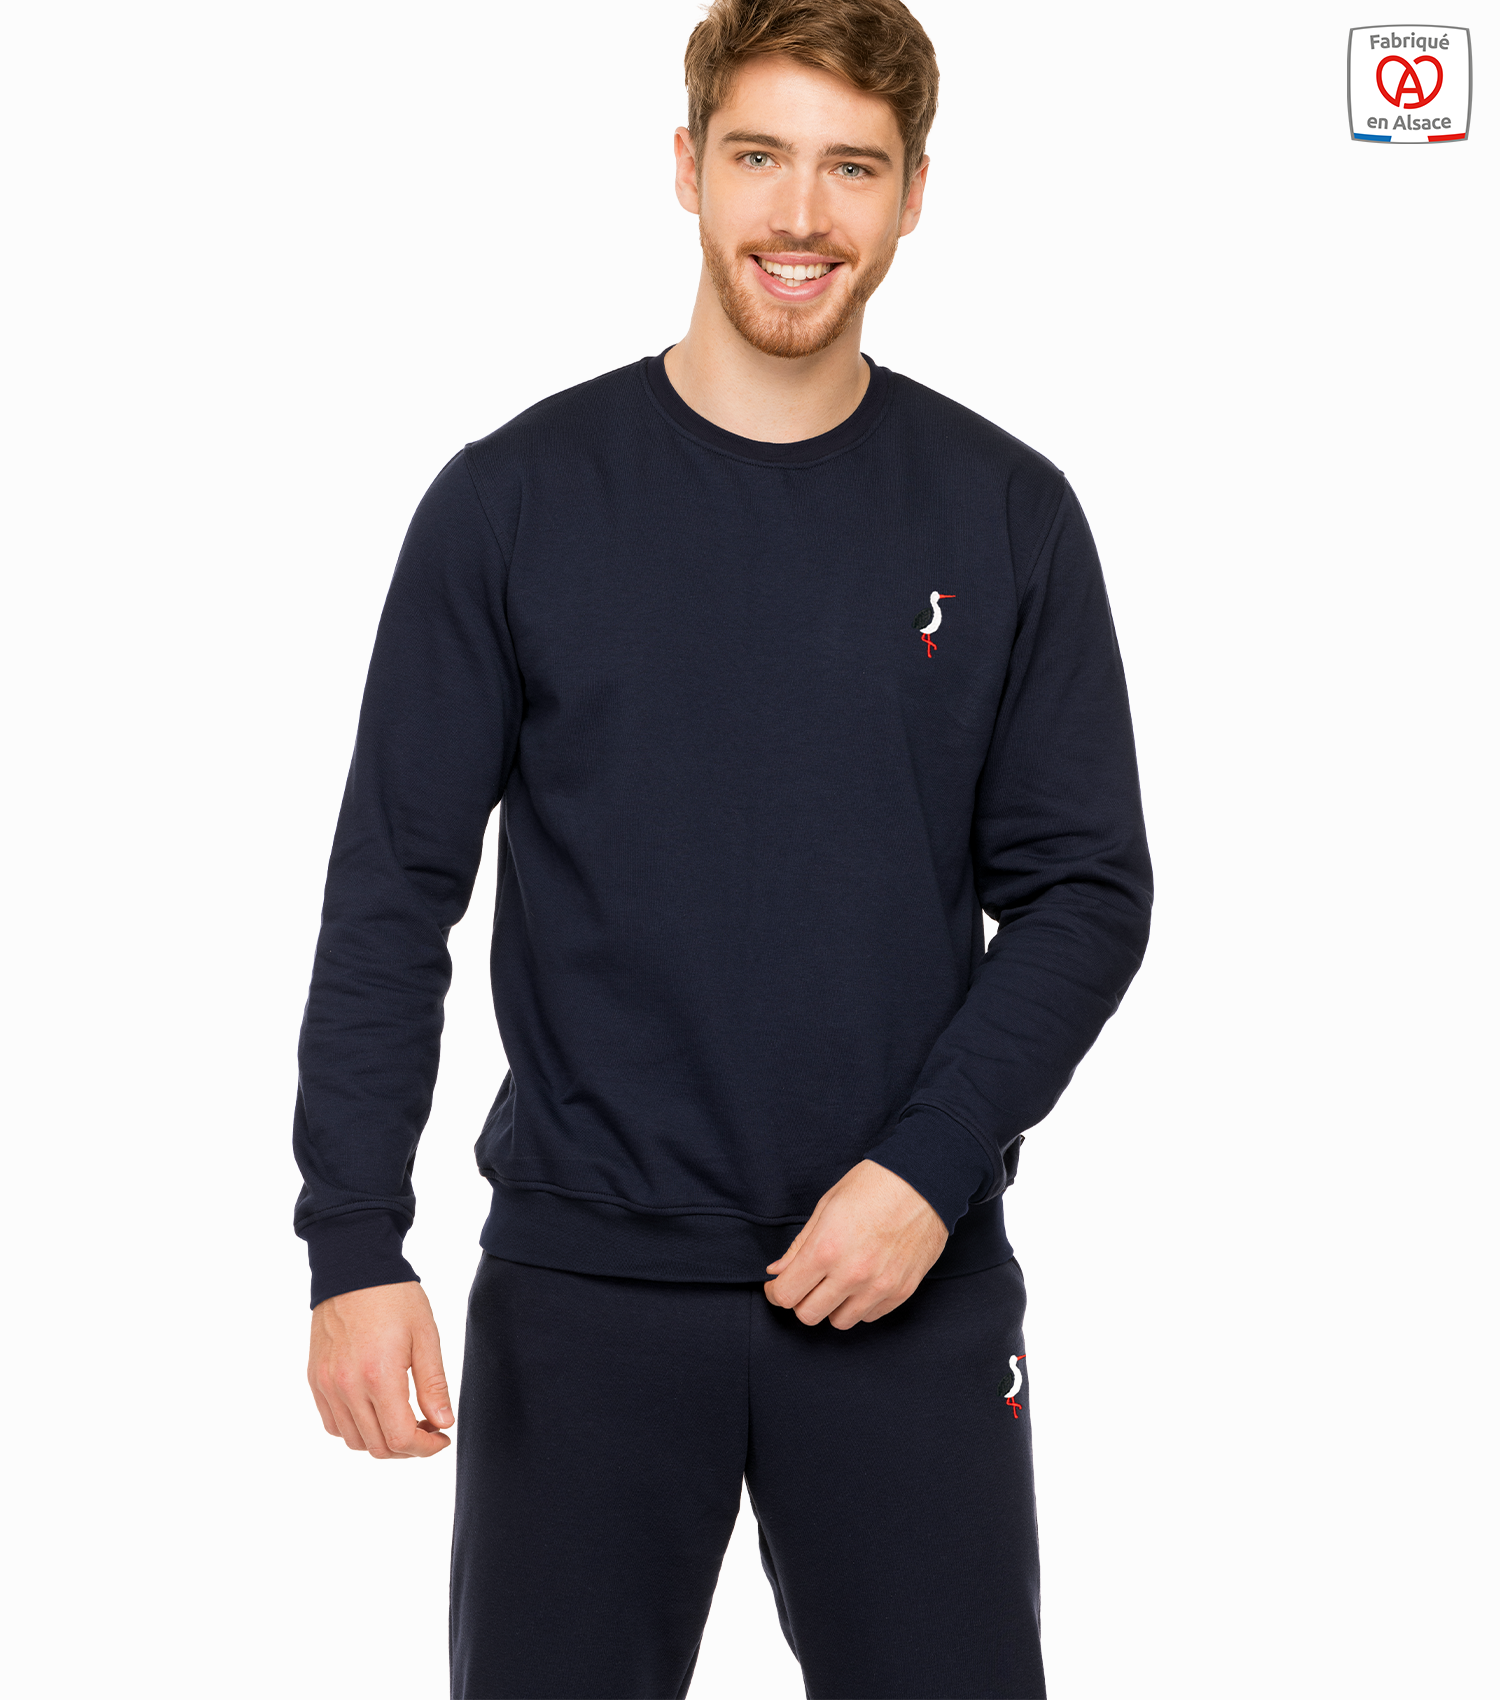 theim-jogging-homme-cigogne-made-in-france-1500-x-1700-px